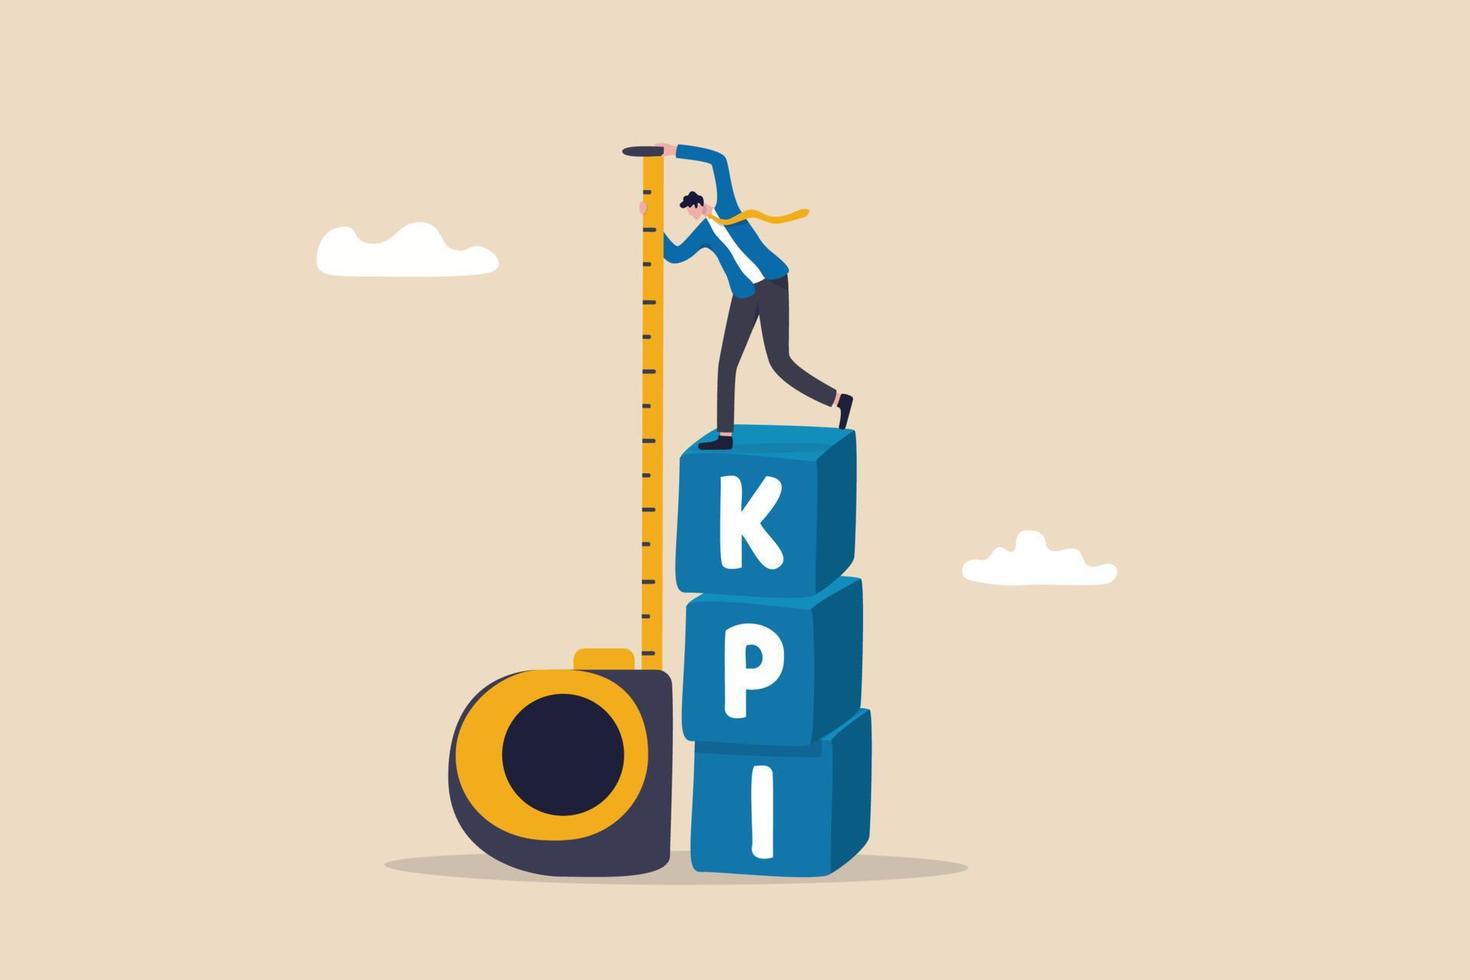 KPI, key performance indicator measurement to evaluate success or meet target, metric or data to review and improve business concept, businessman standing on top of KPI box measuring performance. vector